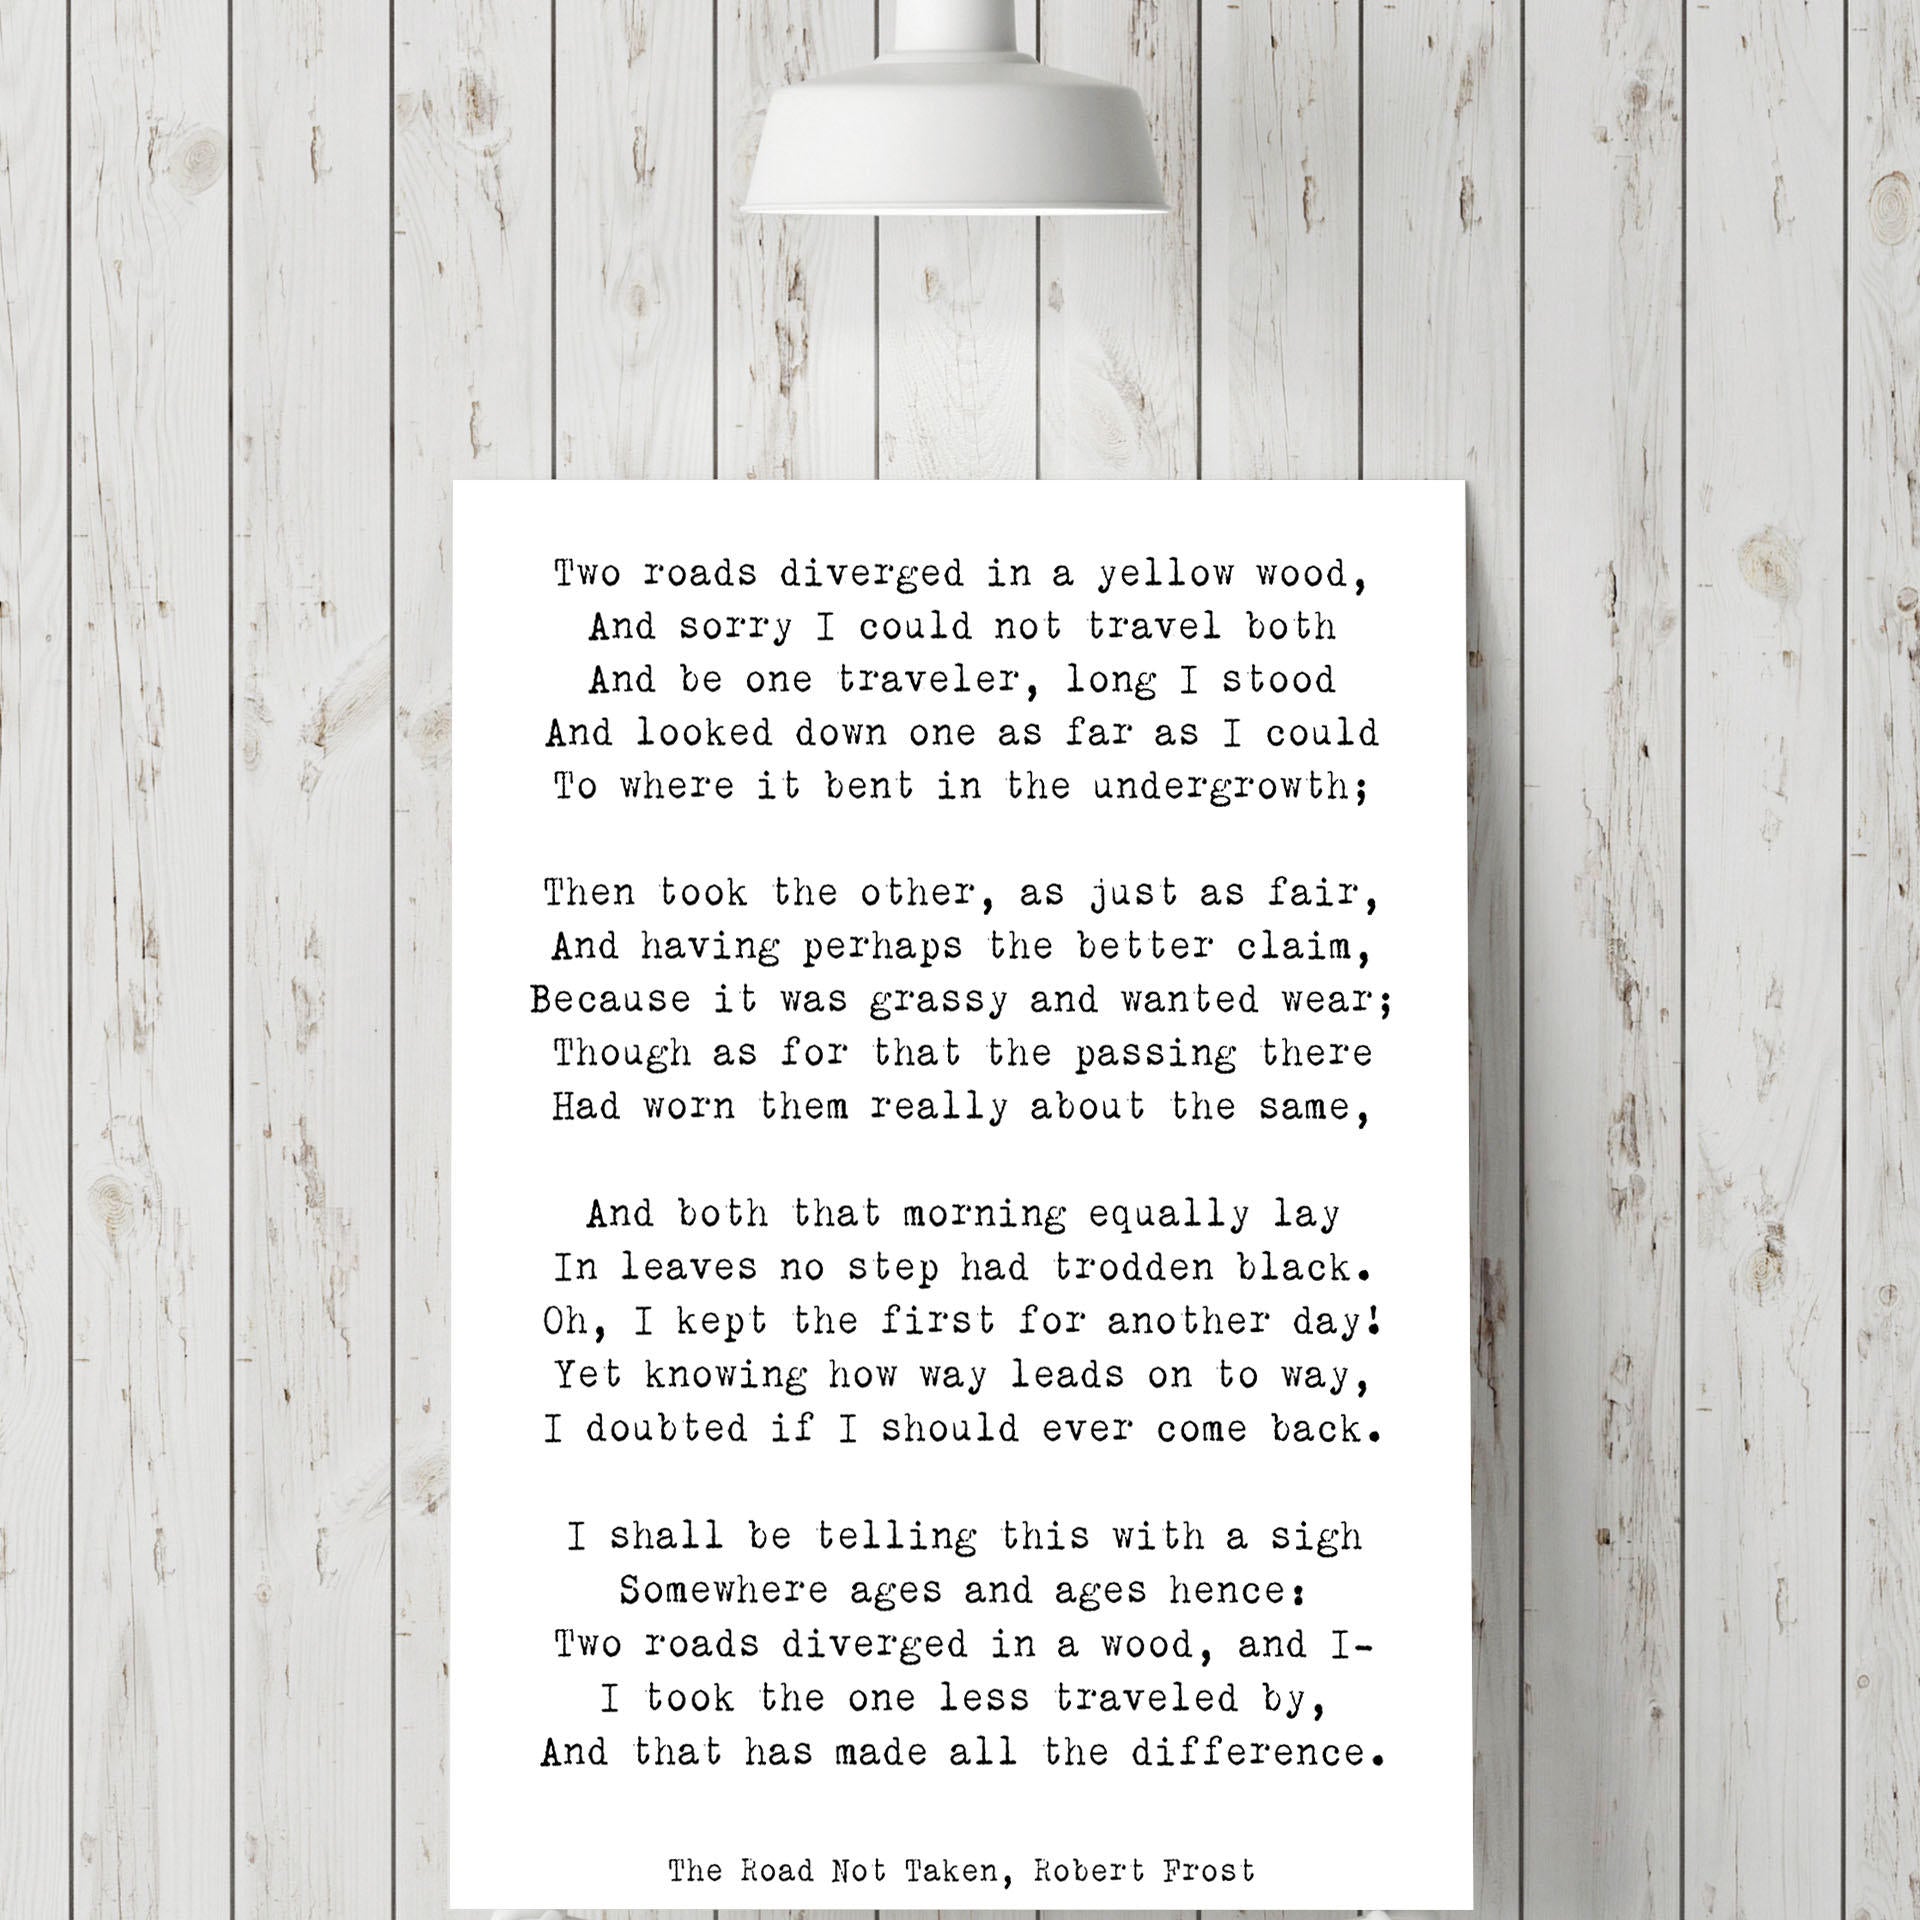 Robert Frost Poem Quote Print, The Road Not Taken Poem Poster, Two Roads Diverged